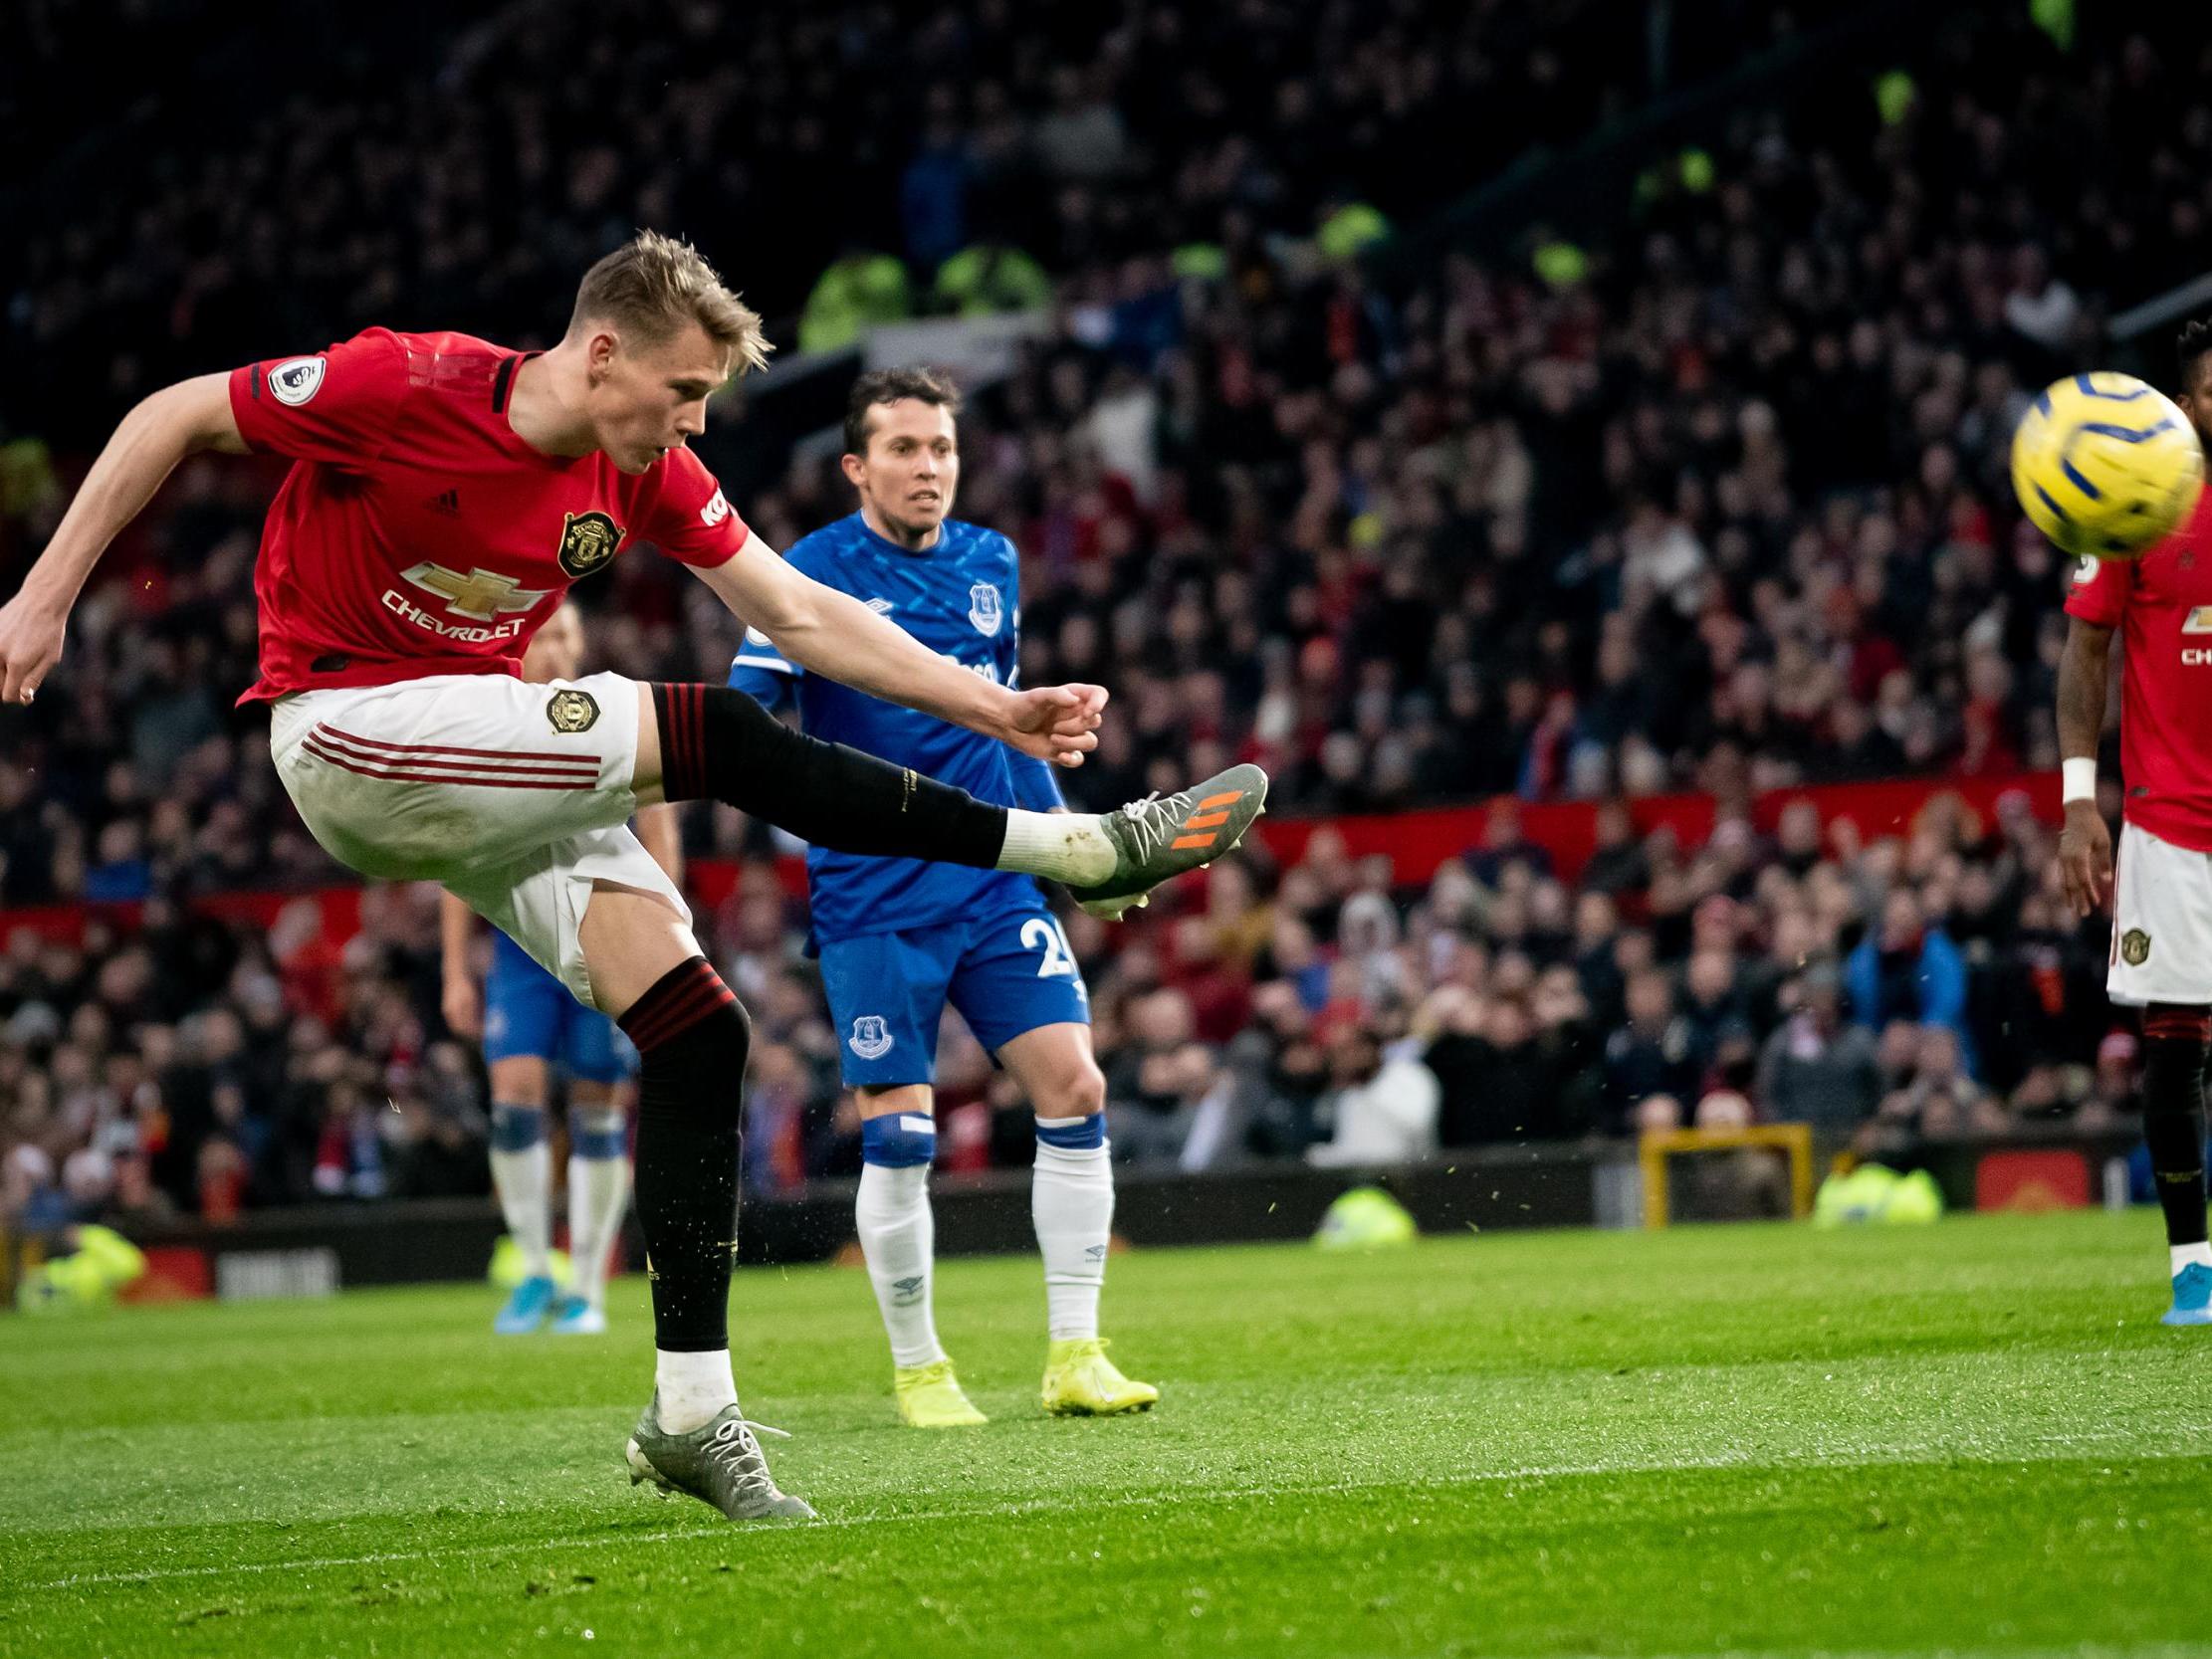 Scott McTominay takes a shot on goal for United